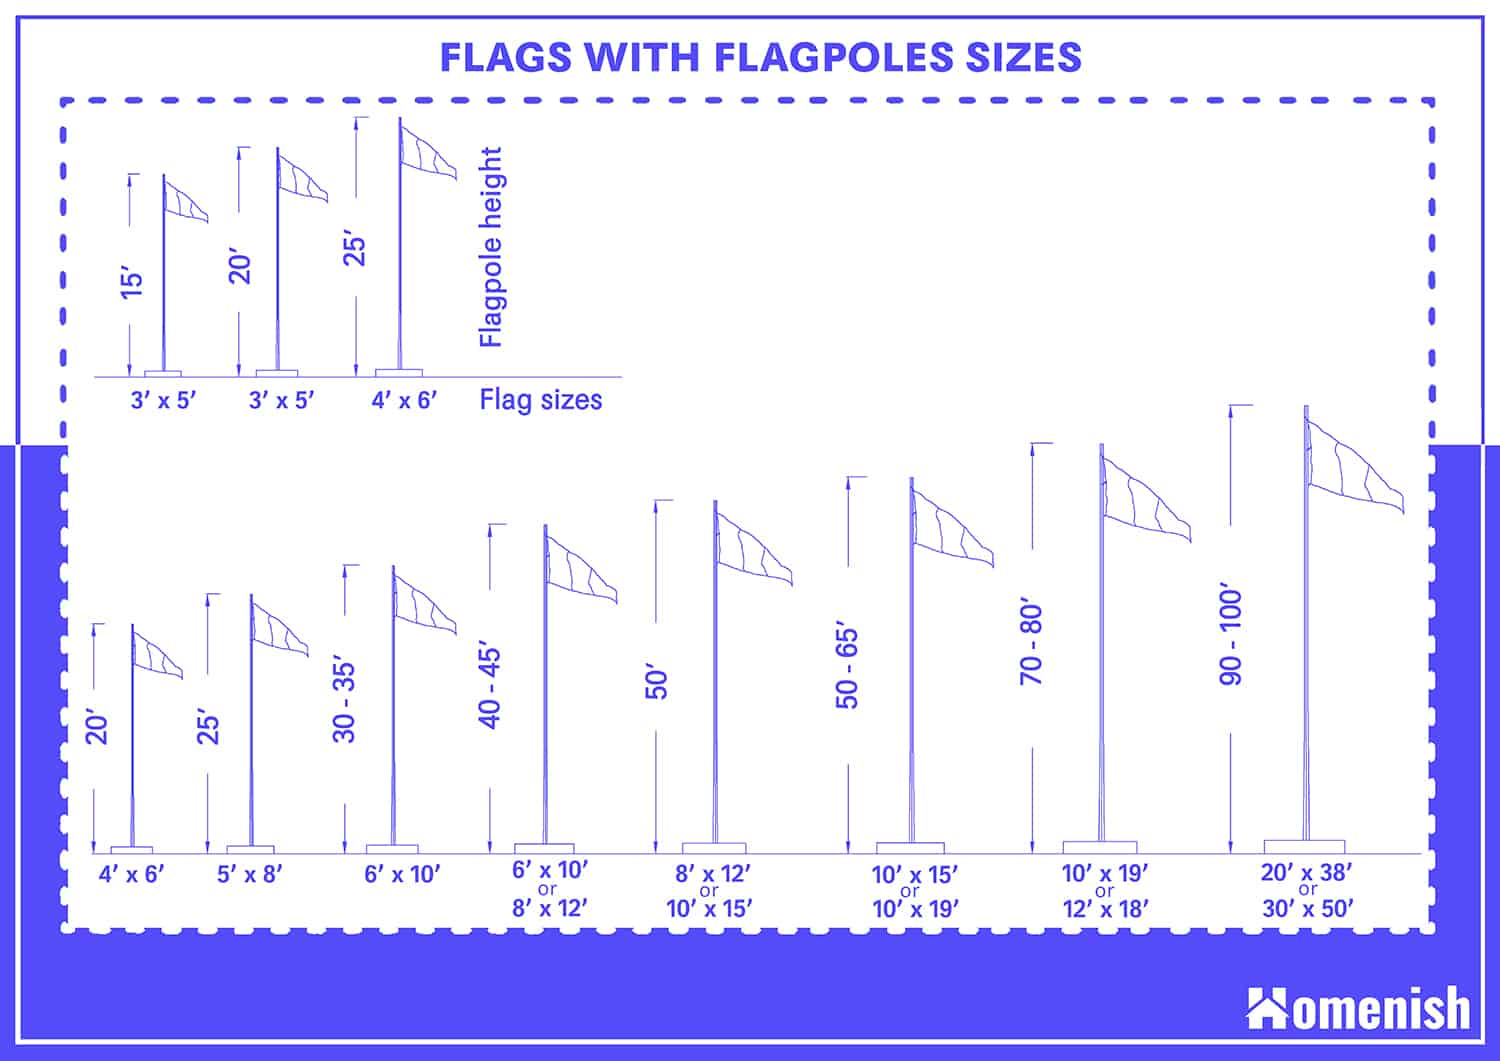 Dimensions of Flags with Flagpoles